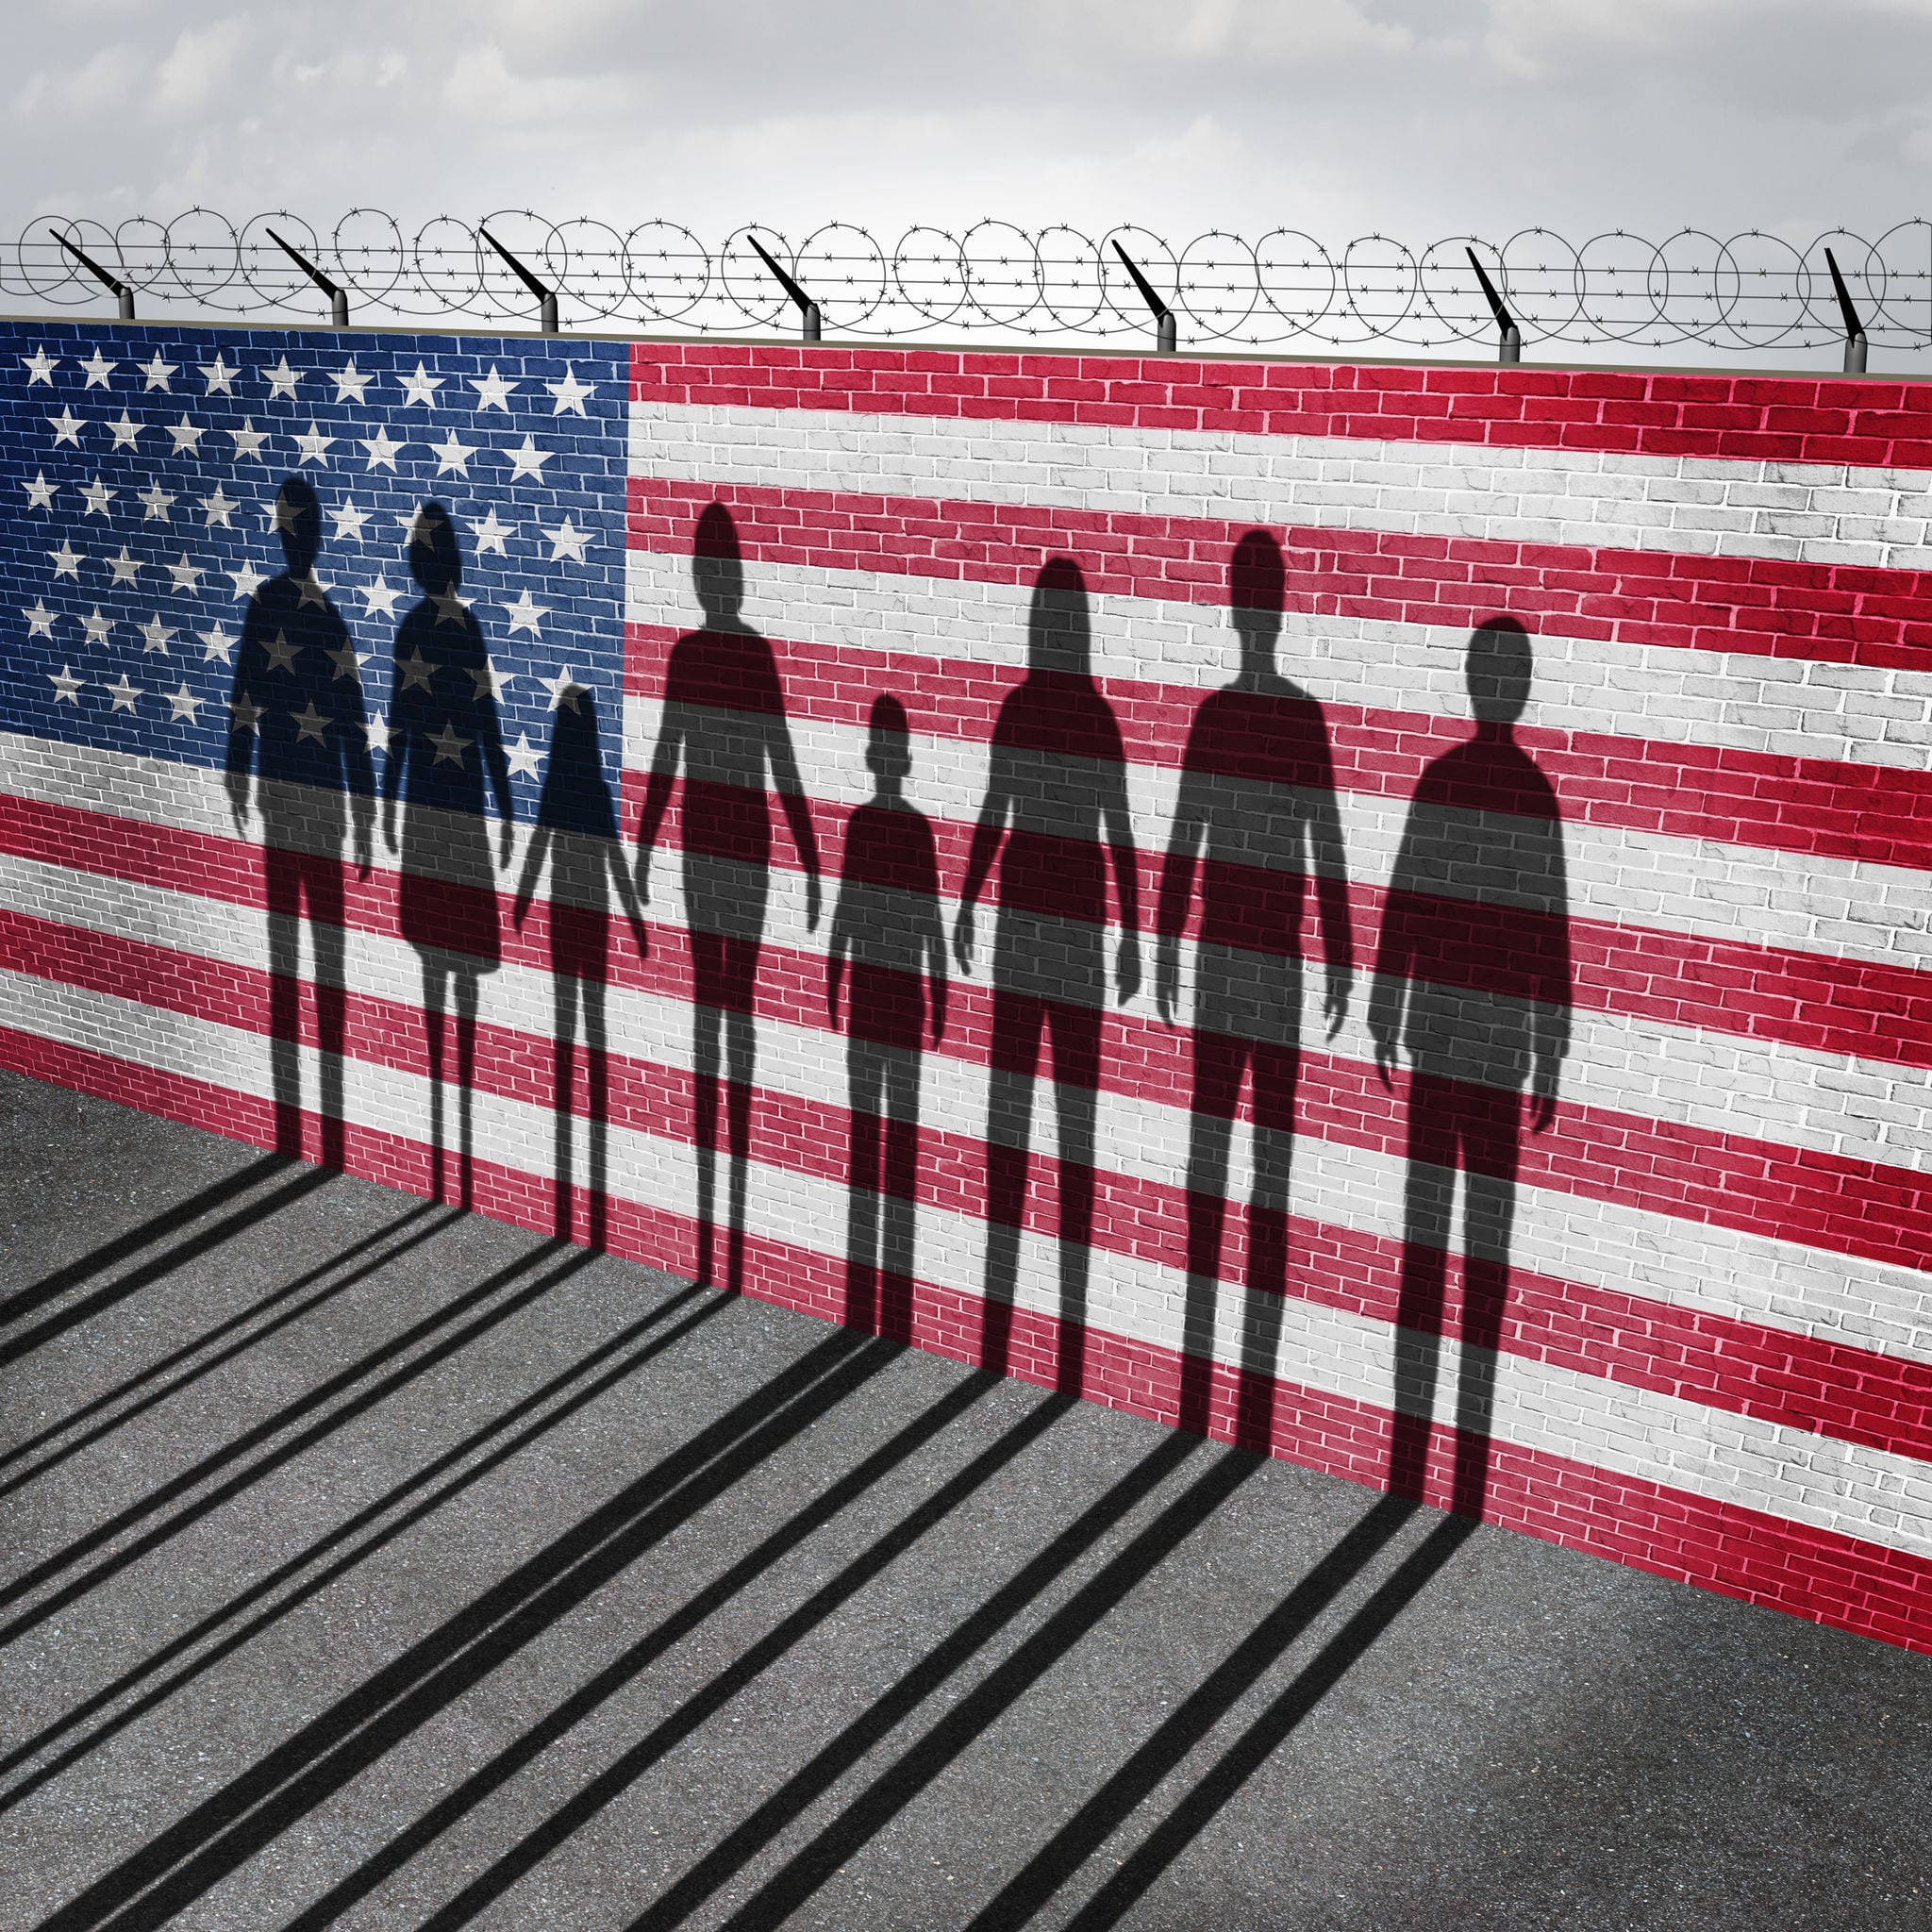 Zero Tolerance Immigration Policies Remain – and They Hurt Us